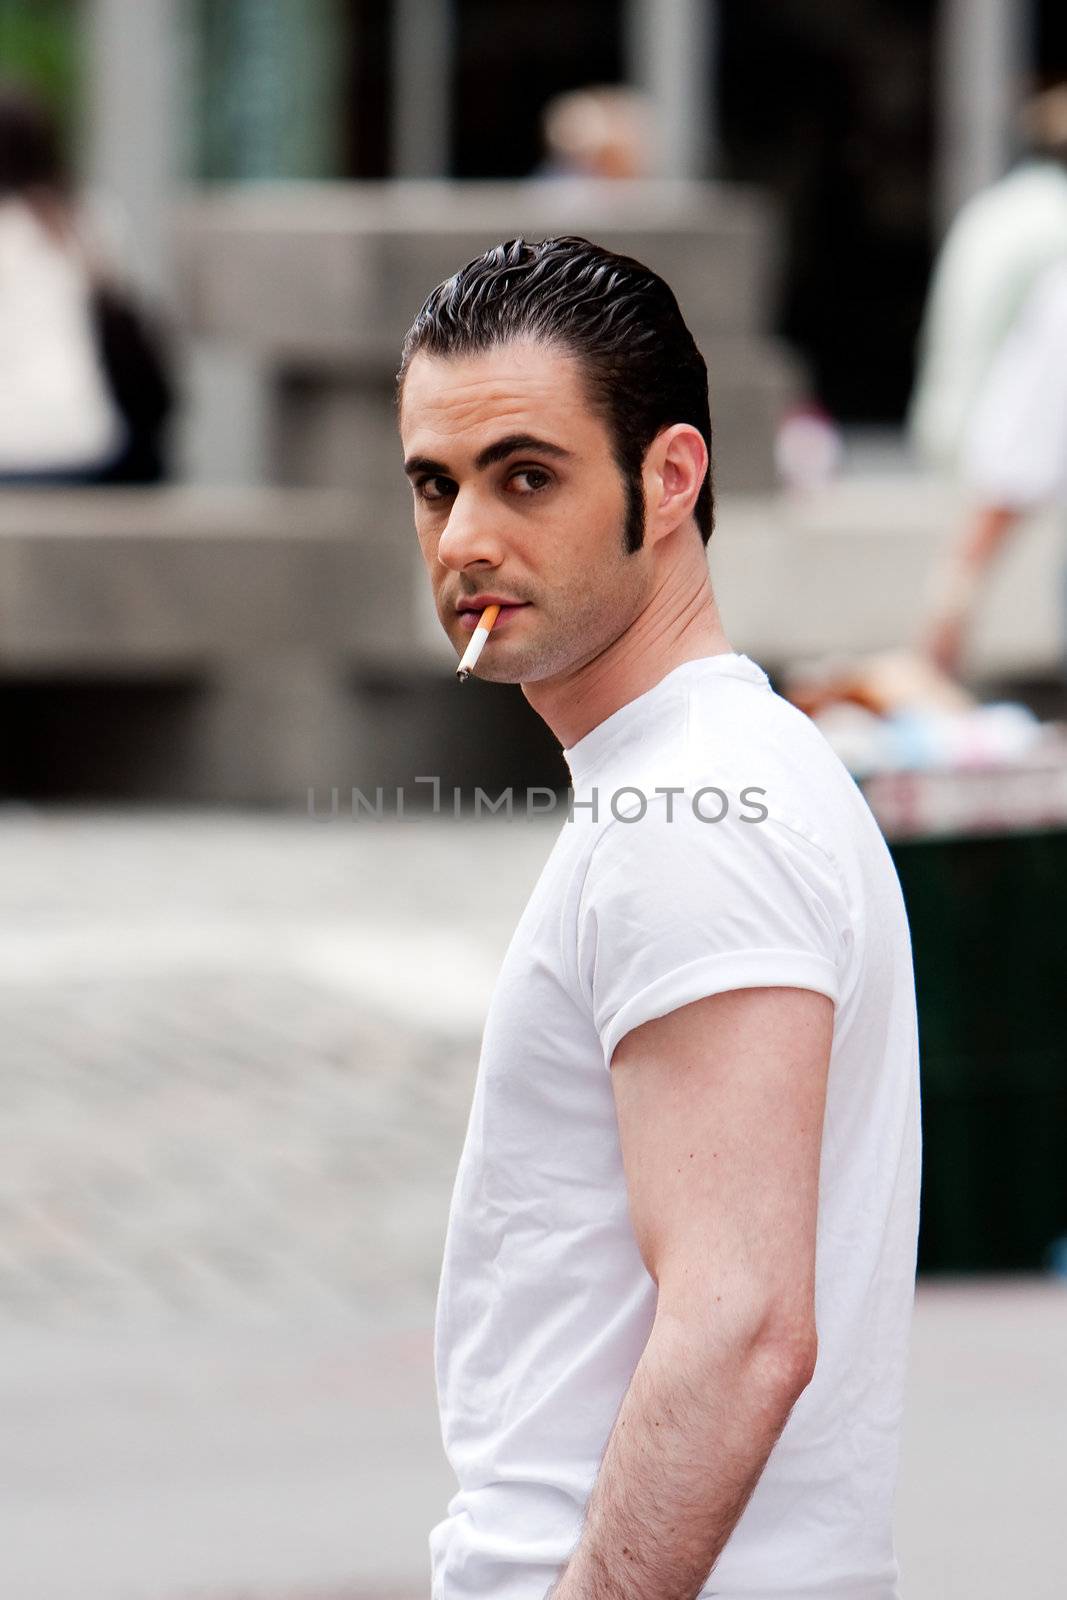 Secret surveillance photo of a Caucasian mafia man with cigarette dressed in white t-shirt on the street